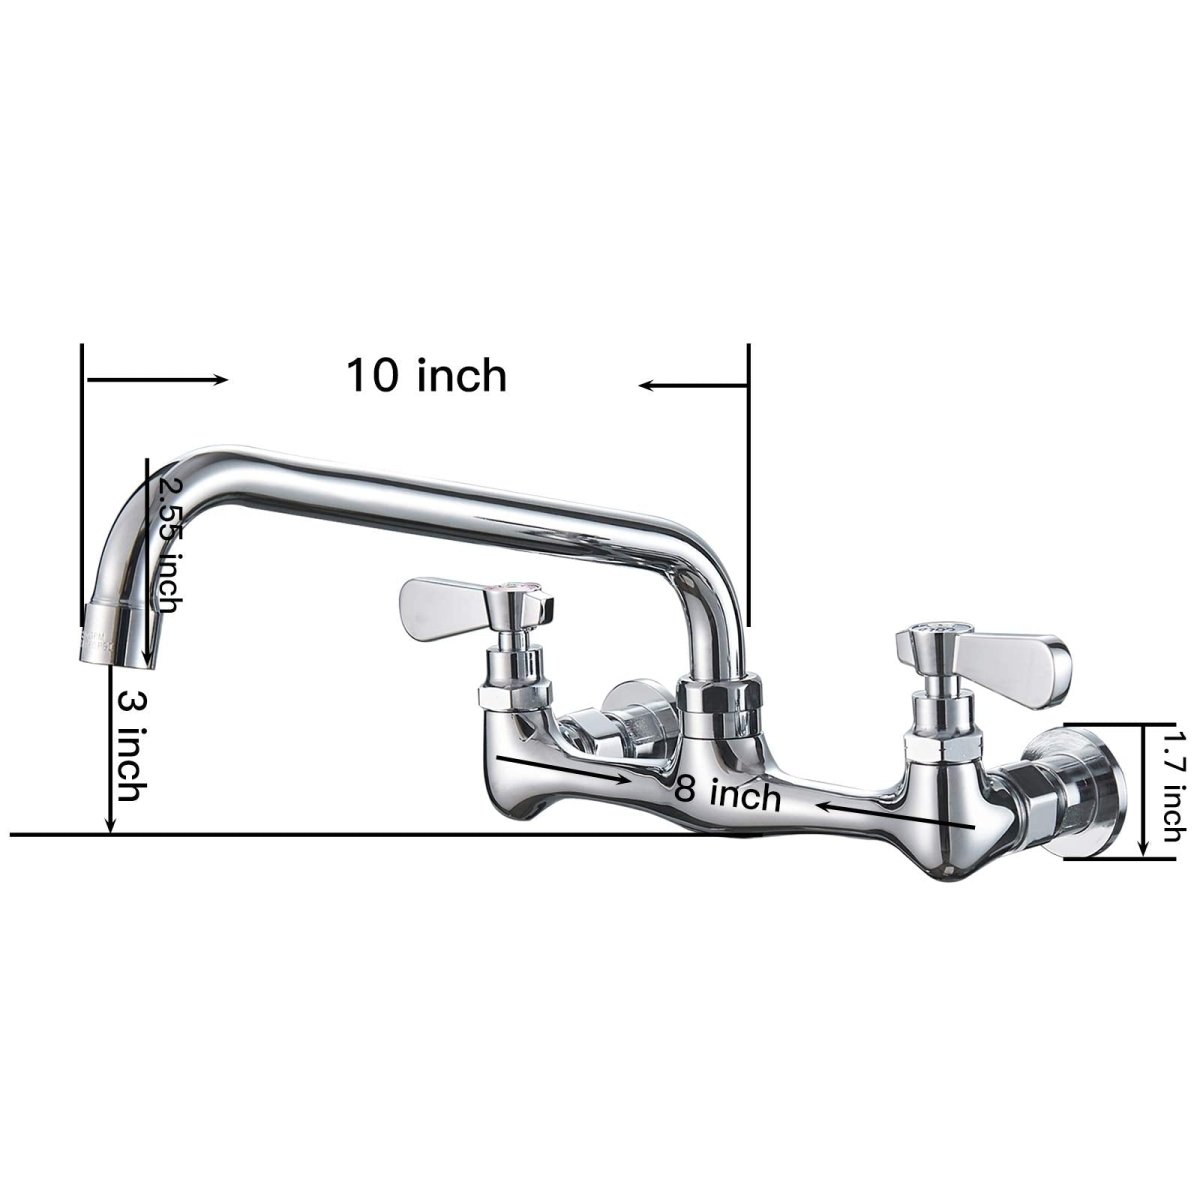 Wall Mount Kitchen Faucet With 10 Inch Swivel Spout Chrome - buyfaucet.com